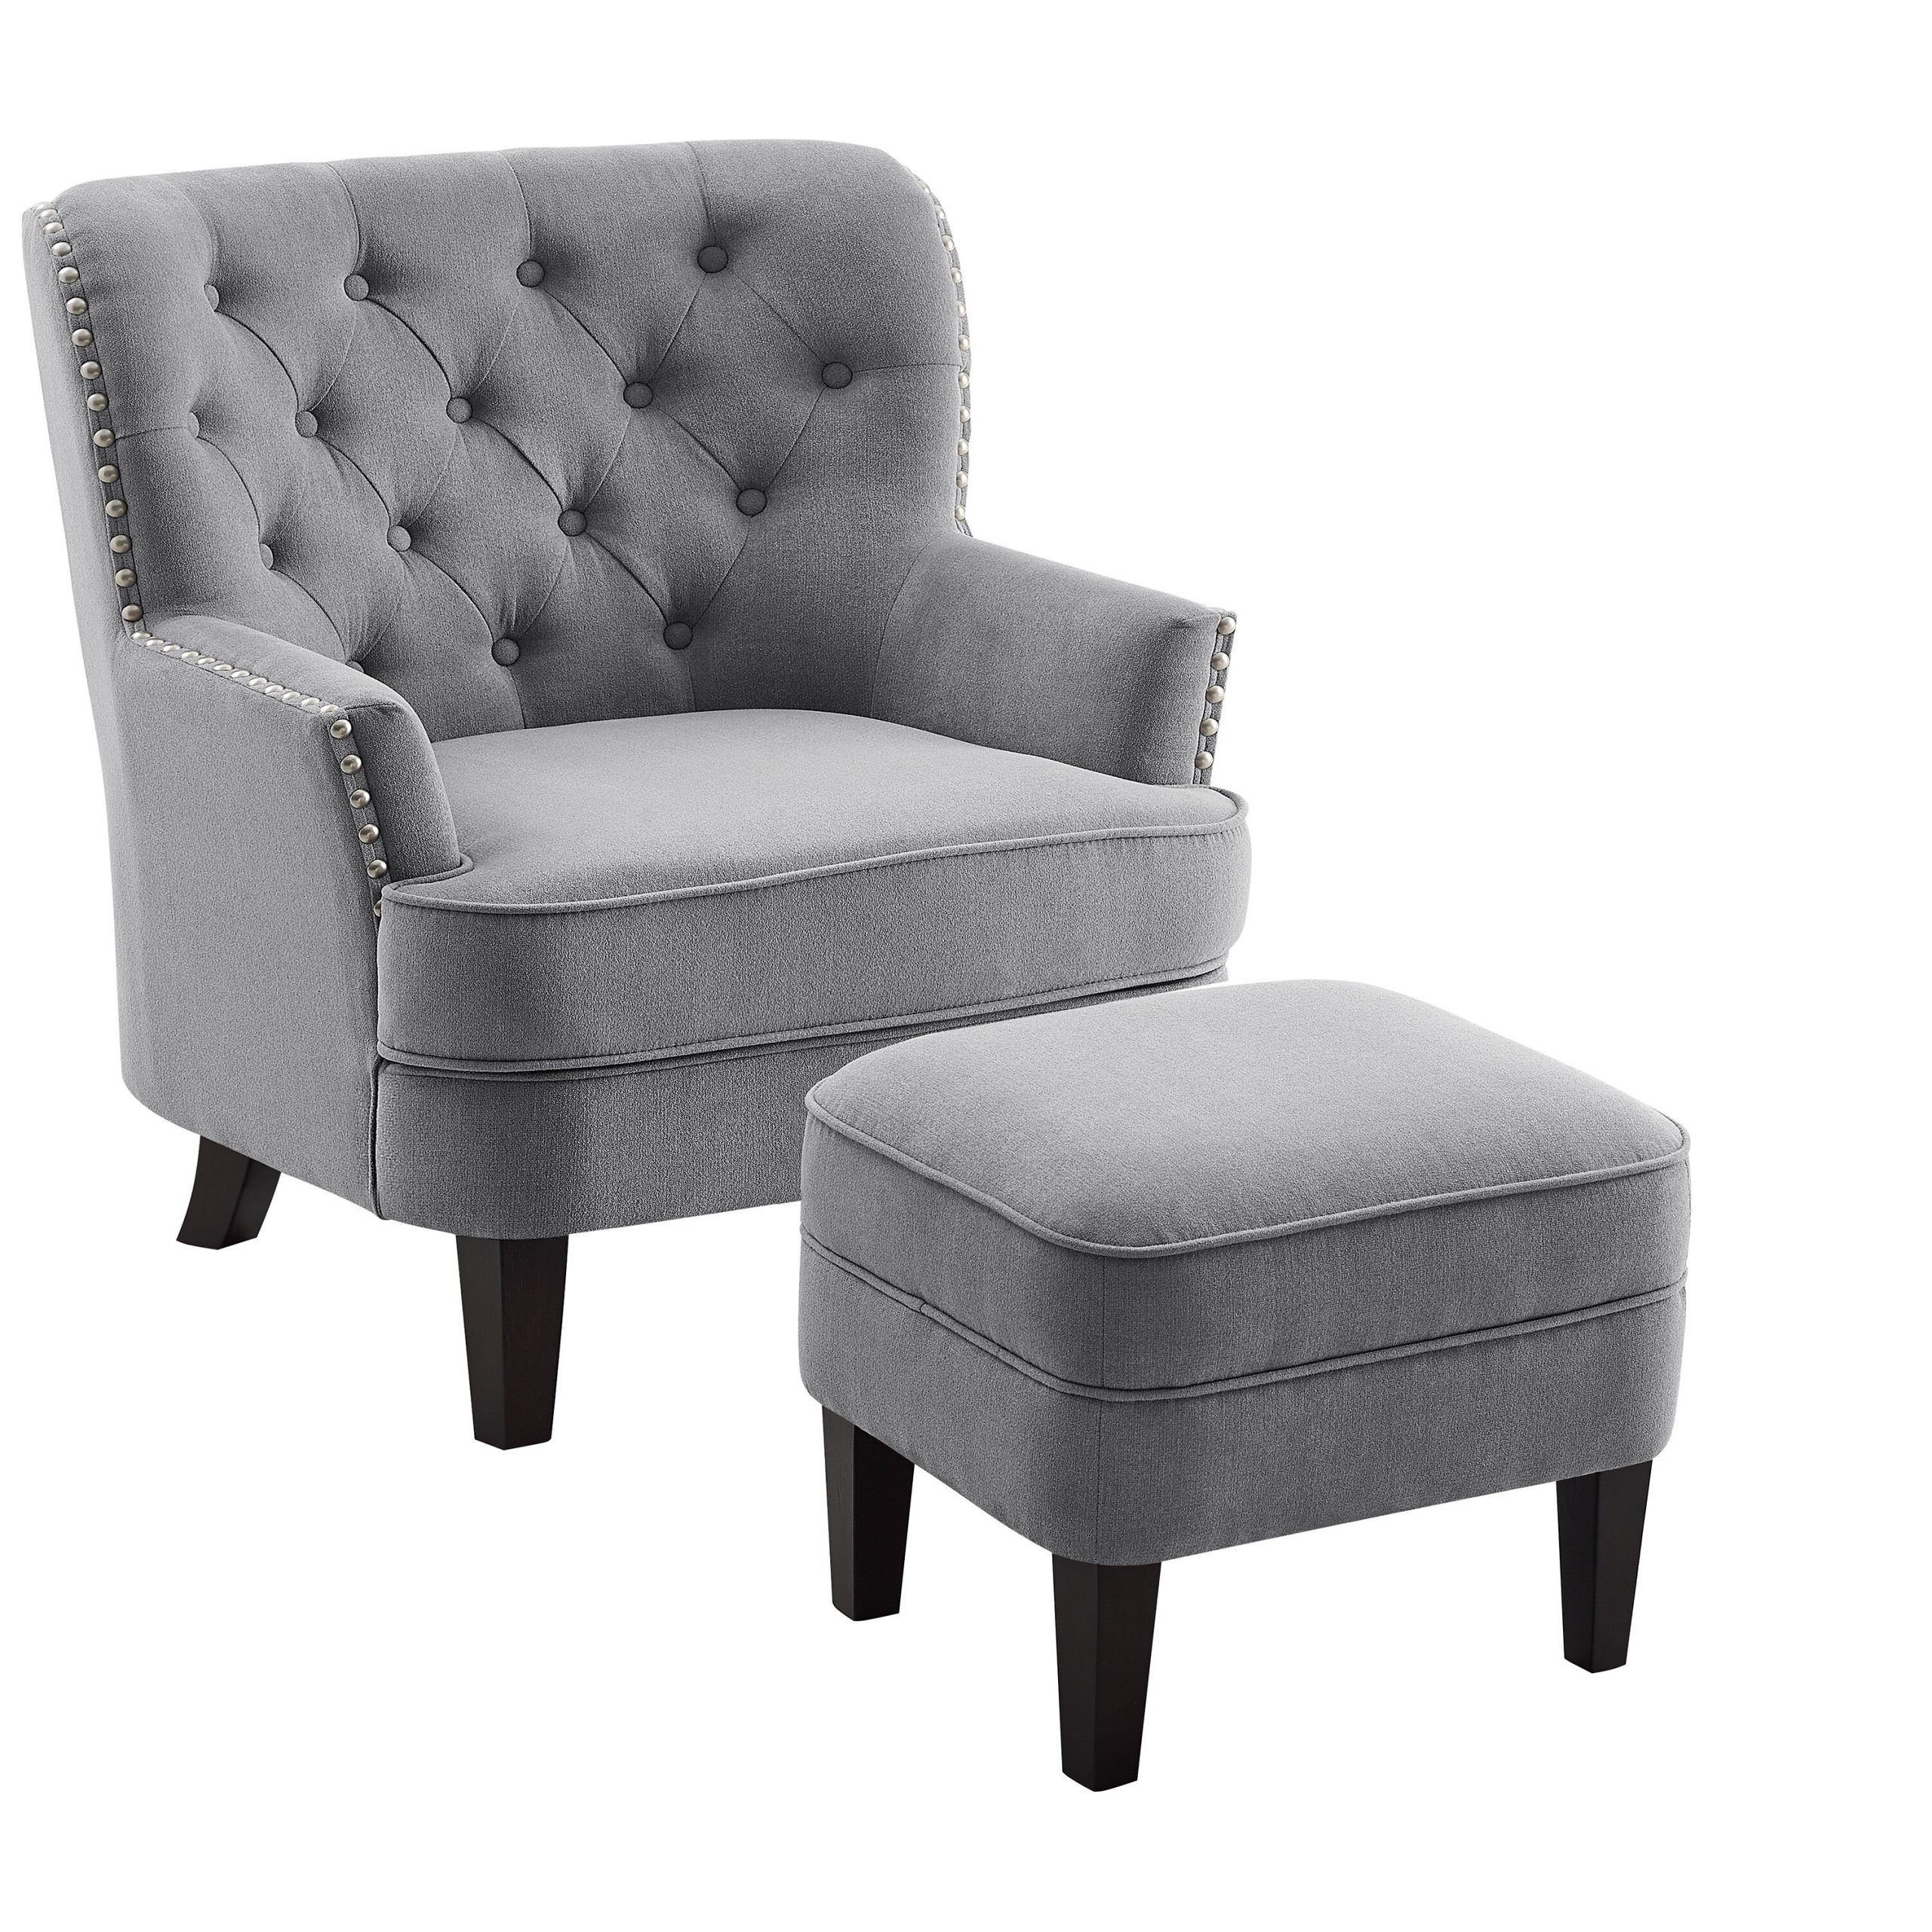 Daulton 20" W Velvet Side Chair Within Artemi Barrel Chair And Ottoman Sets (View 12 of 15)